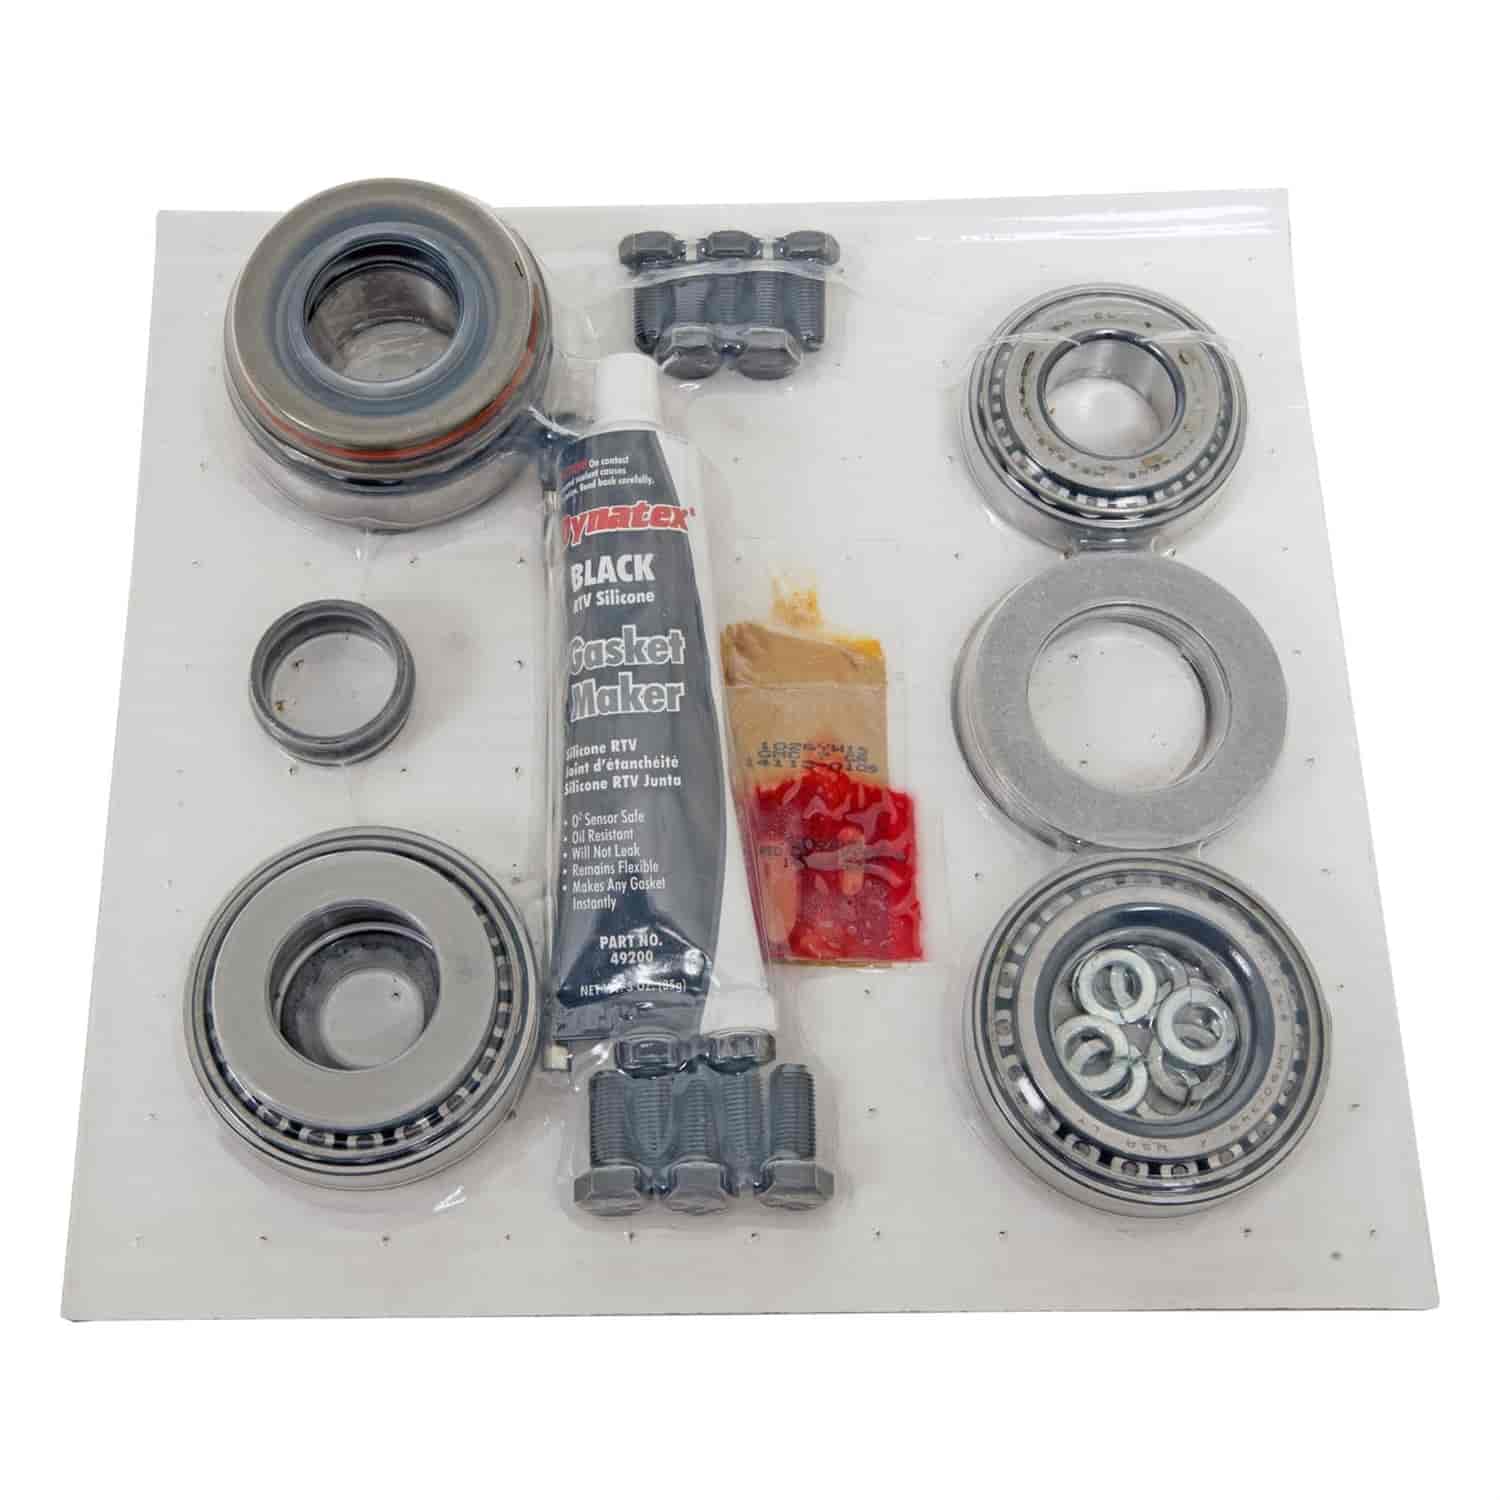 GM 8.2 special complete installation kit D1585 side